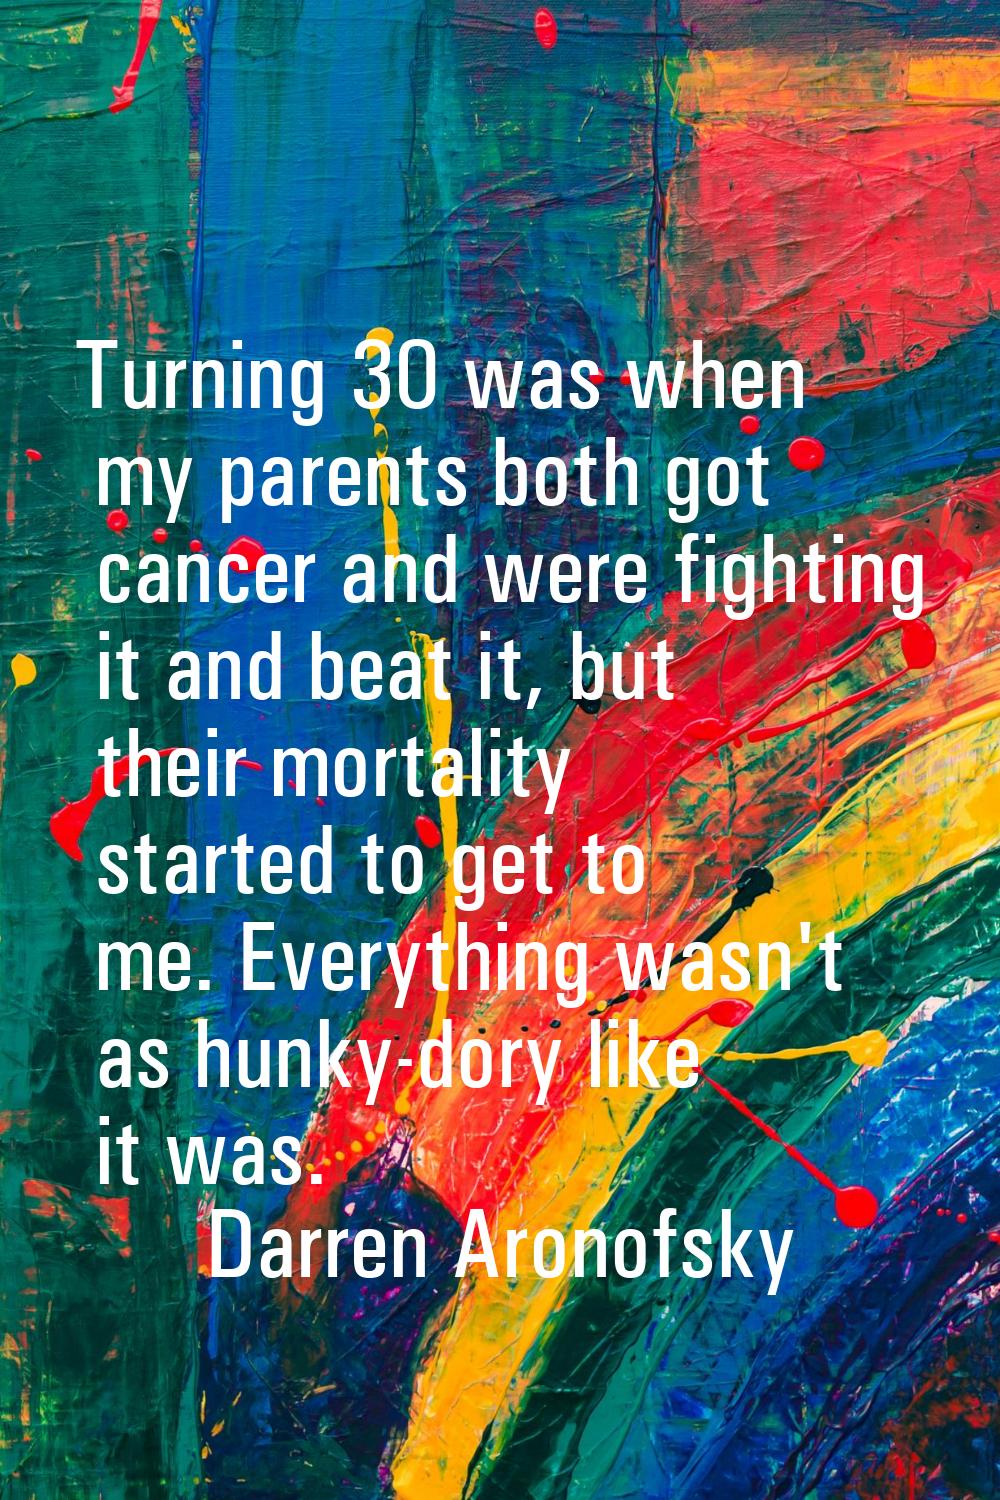 Turning 30 was when my parents both got cancer and were fighting it and beat it, but their mortalit